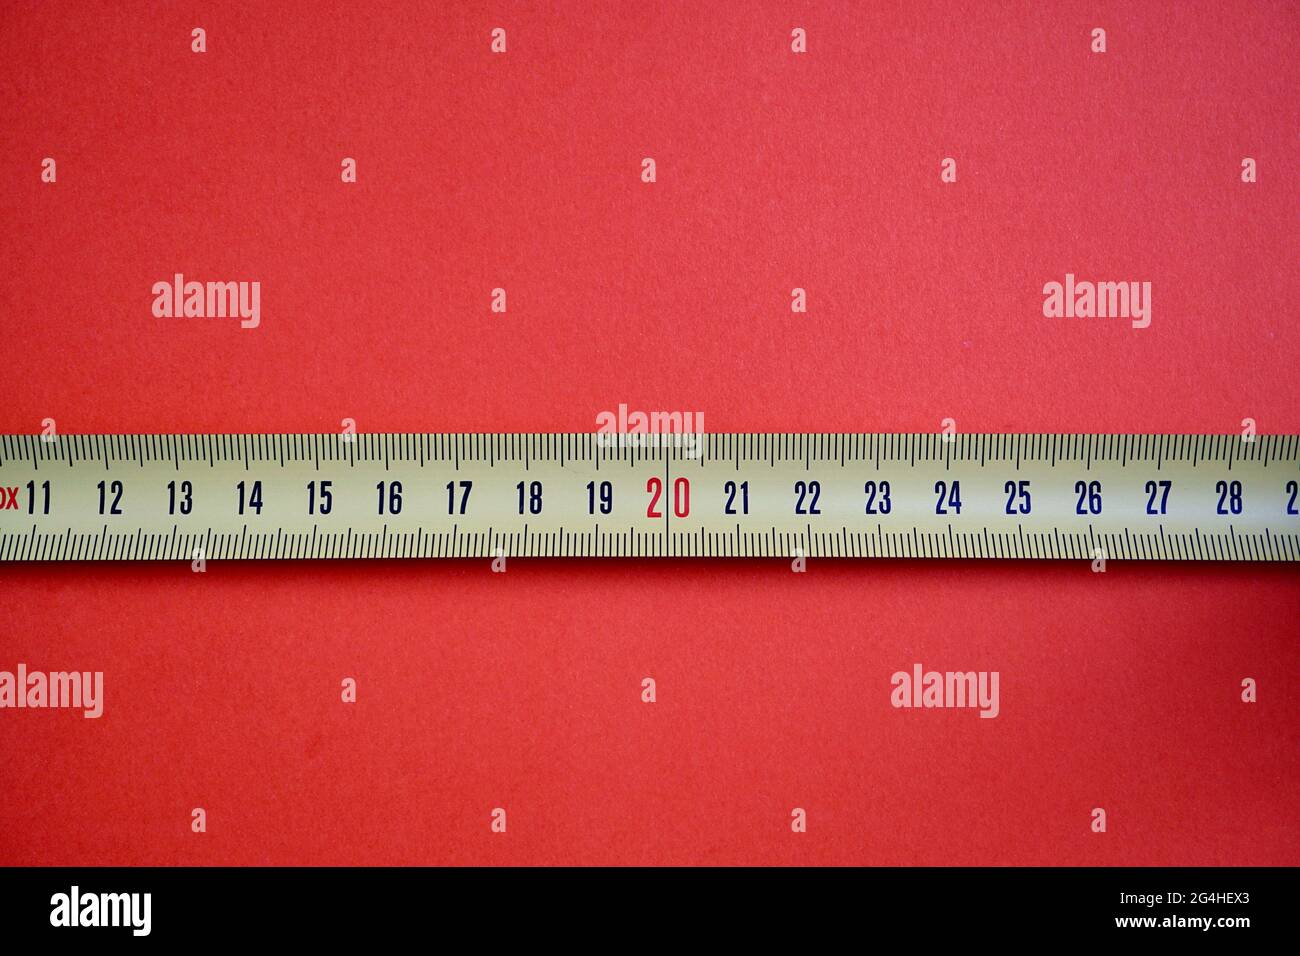 Tape measure isolated on a red background Stock Photo